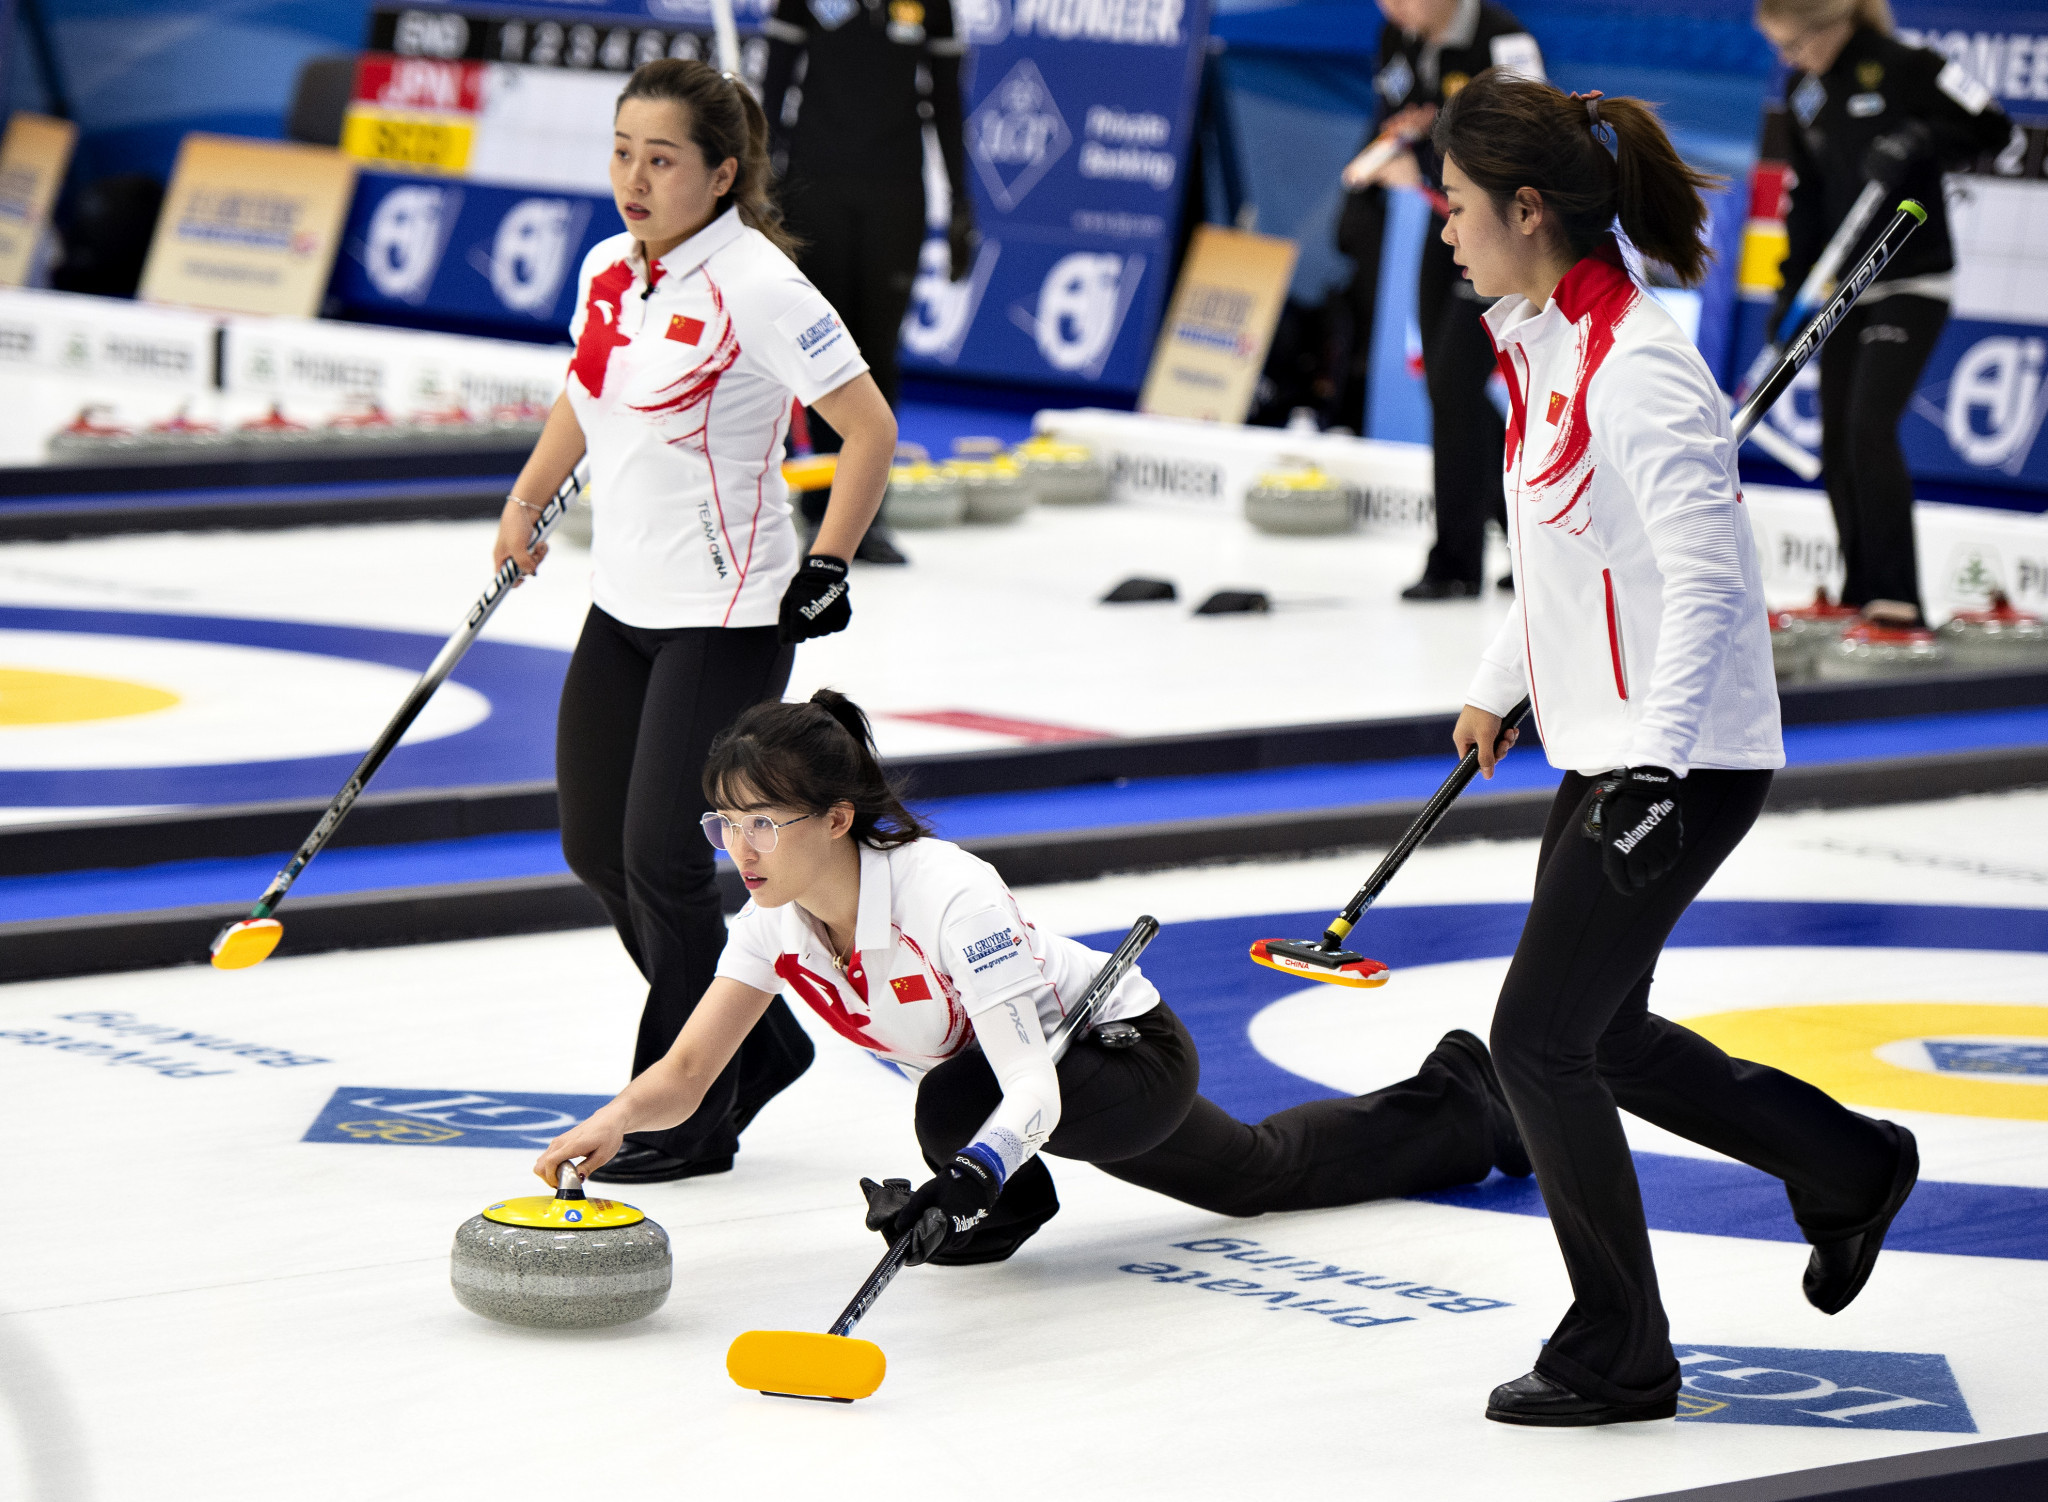 After three days China remain unbeaten at the Women's World Curling Championships ©Getty Images